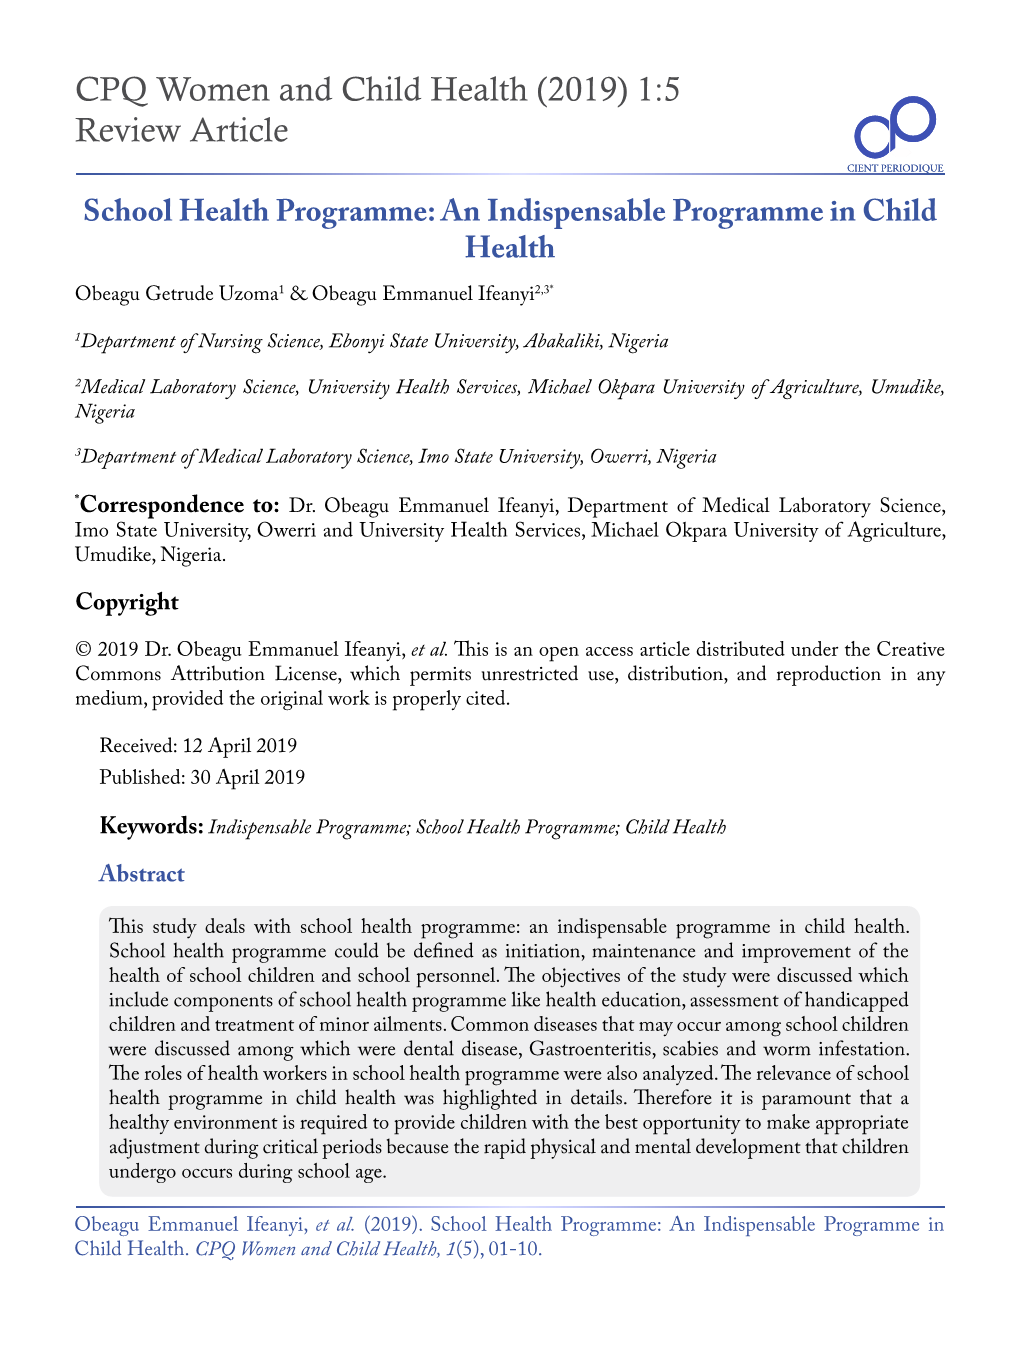 CPQ Women and Child Health (2019) 1:5 Review Article